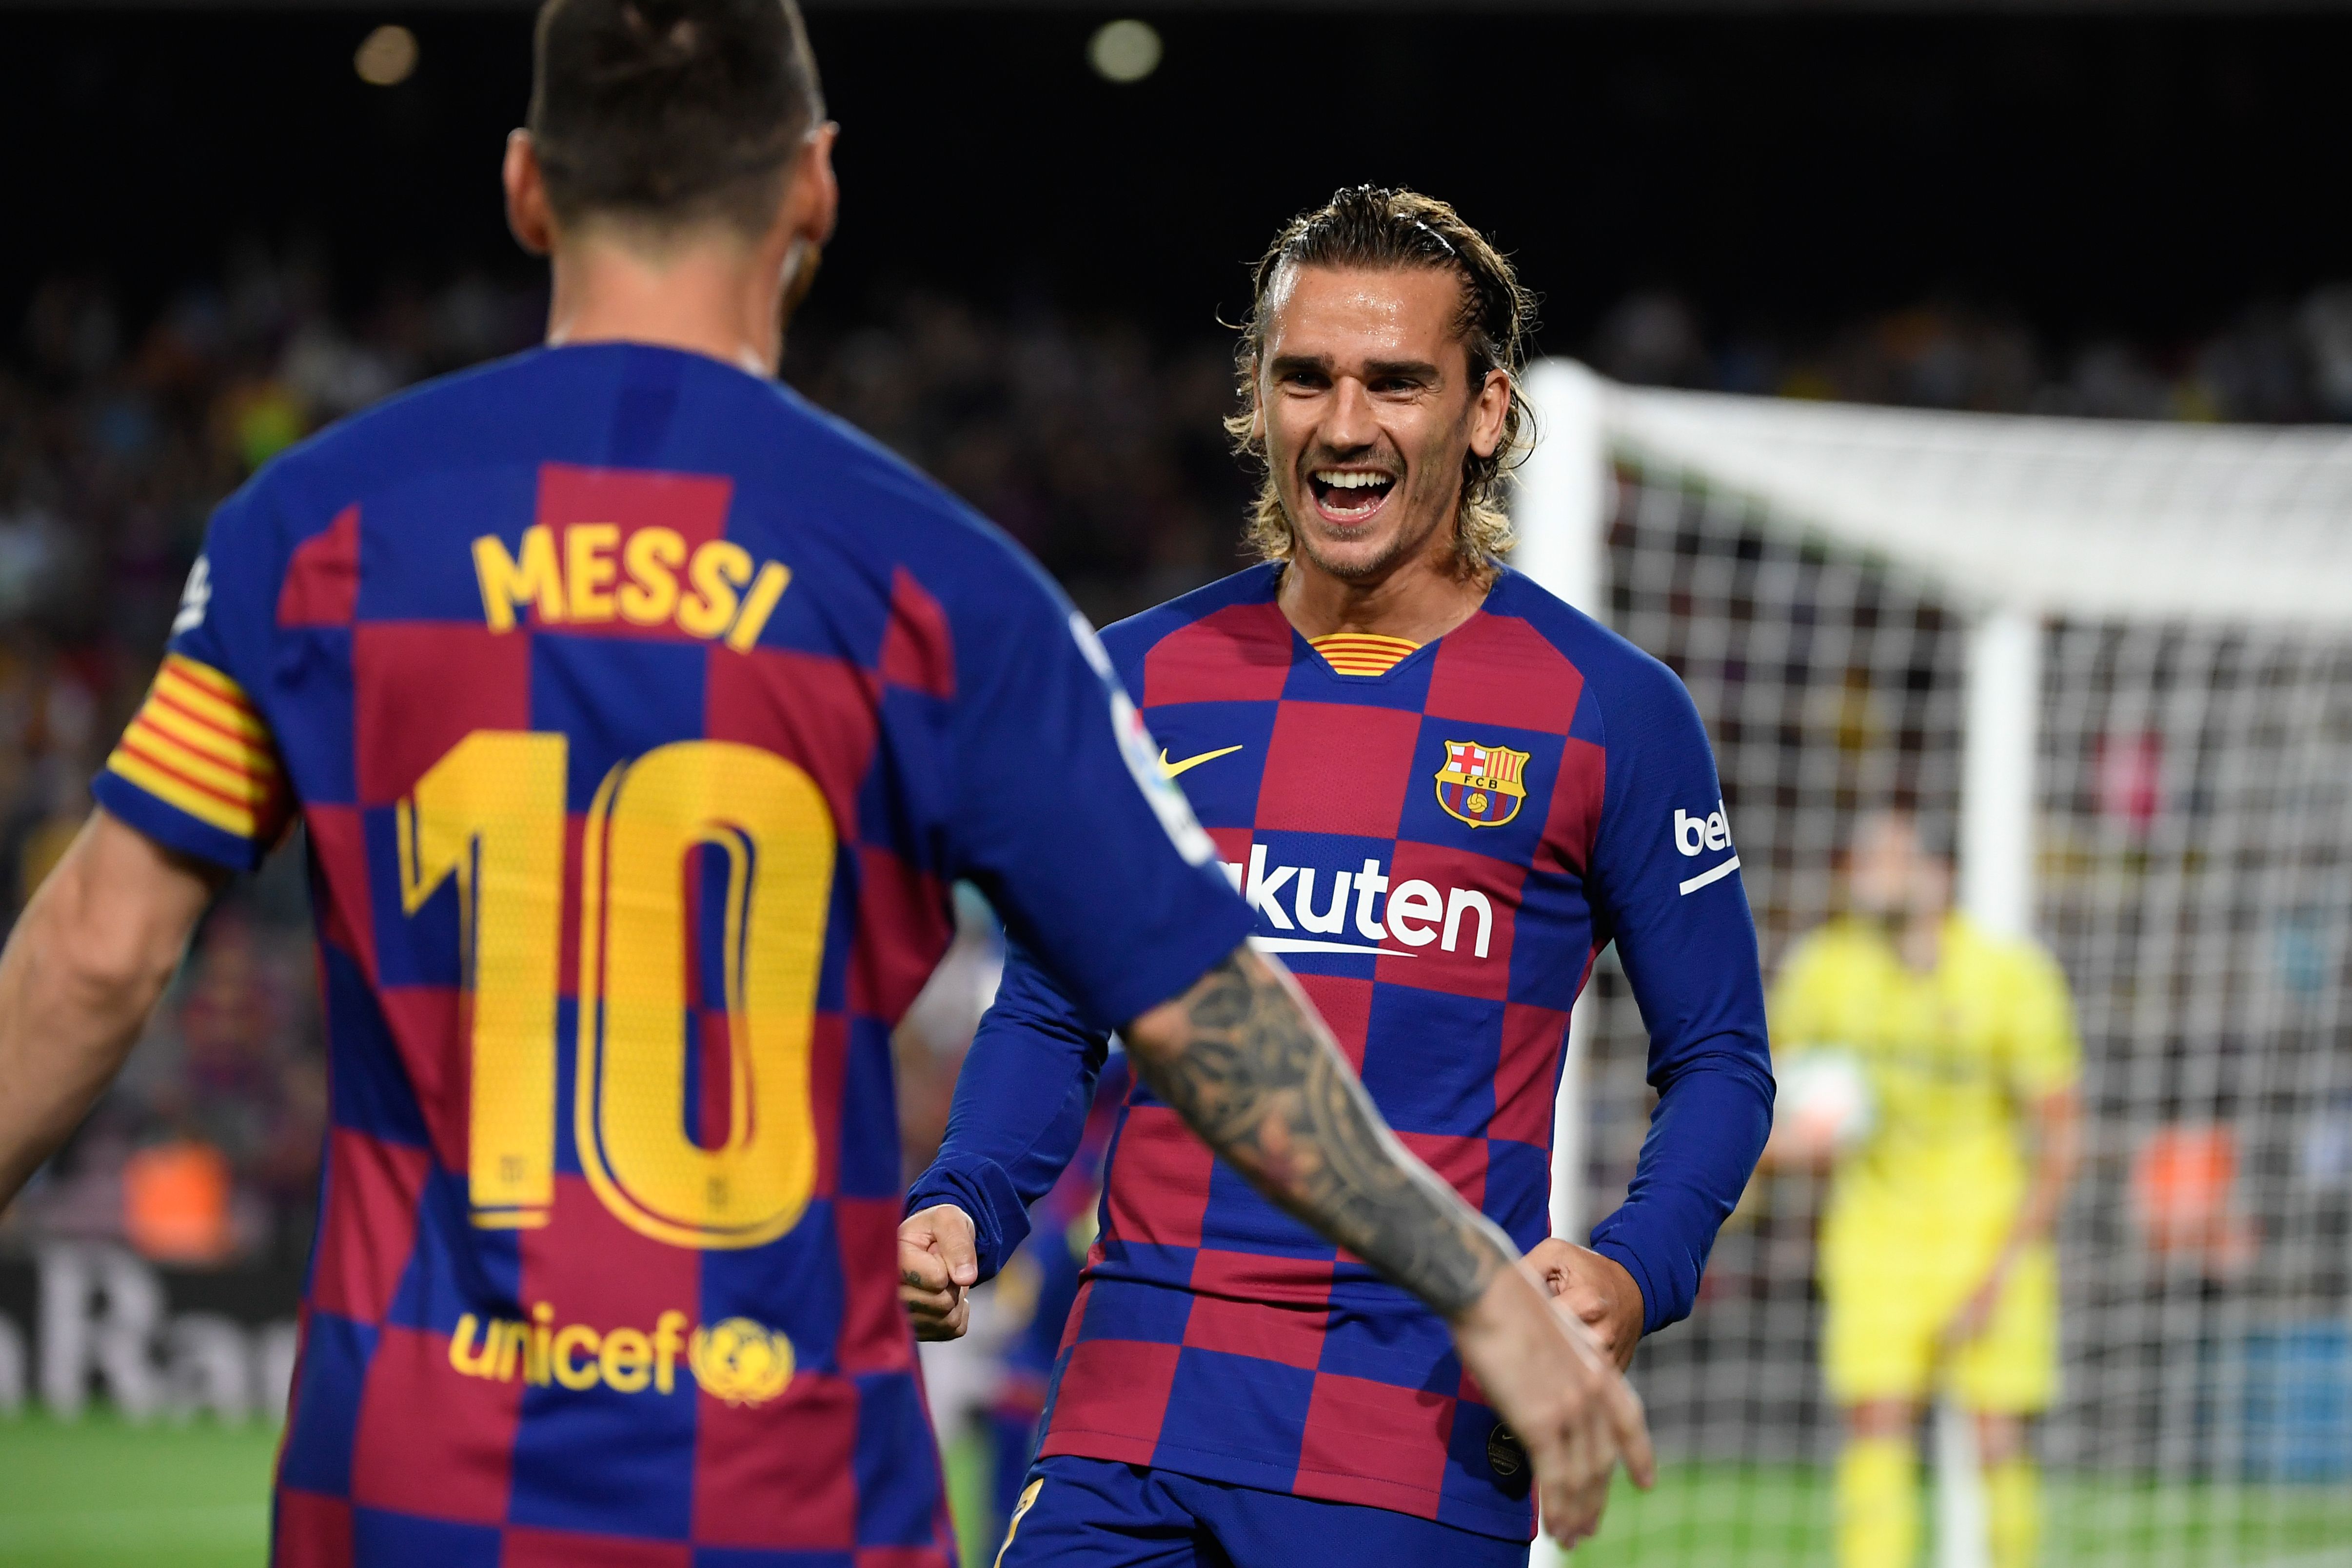 Messi and Griezmann combined for Barcelona's opener (Photo by LLUIS GENE/AFP/Getty Images)